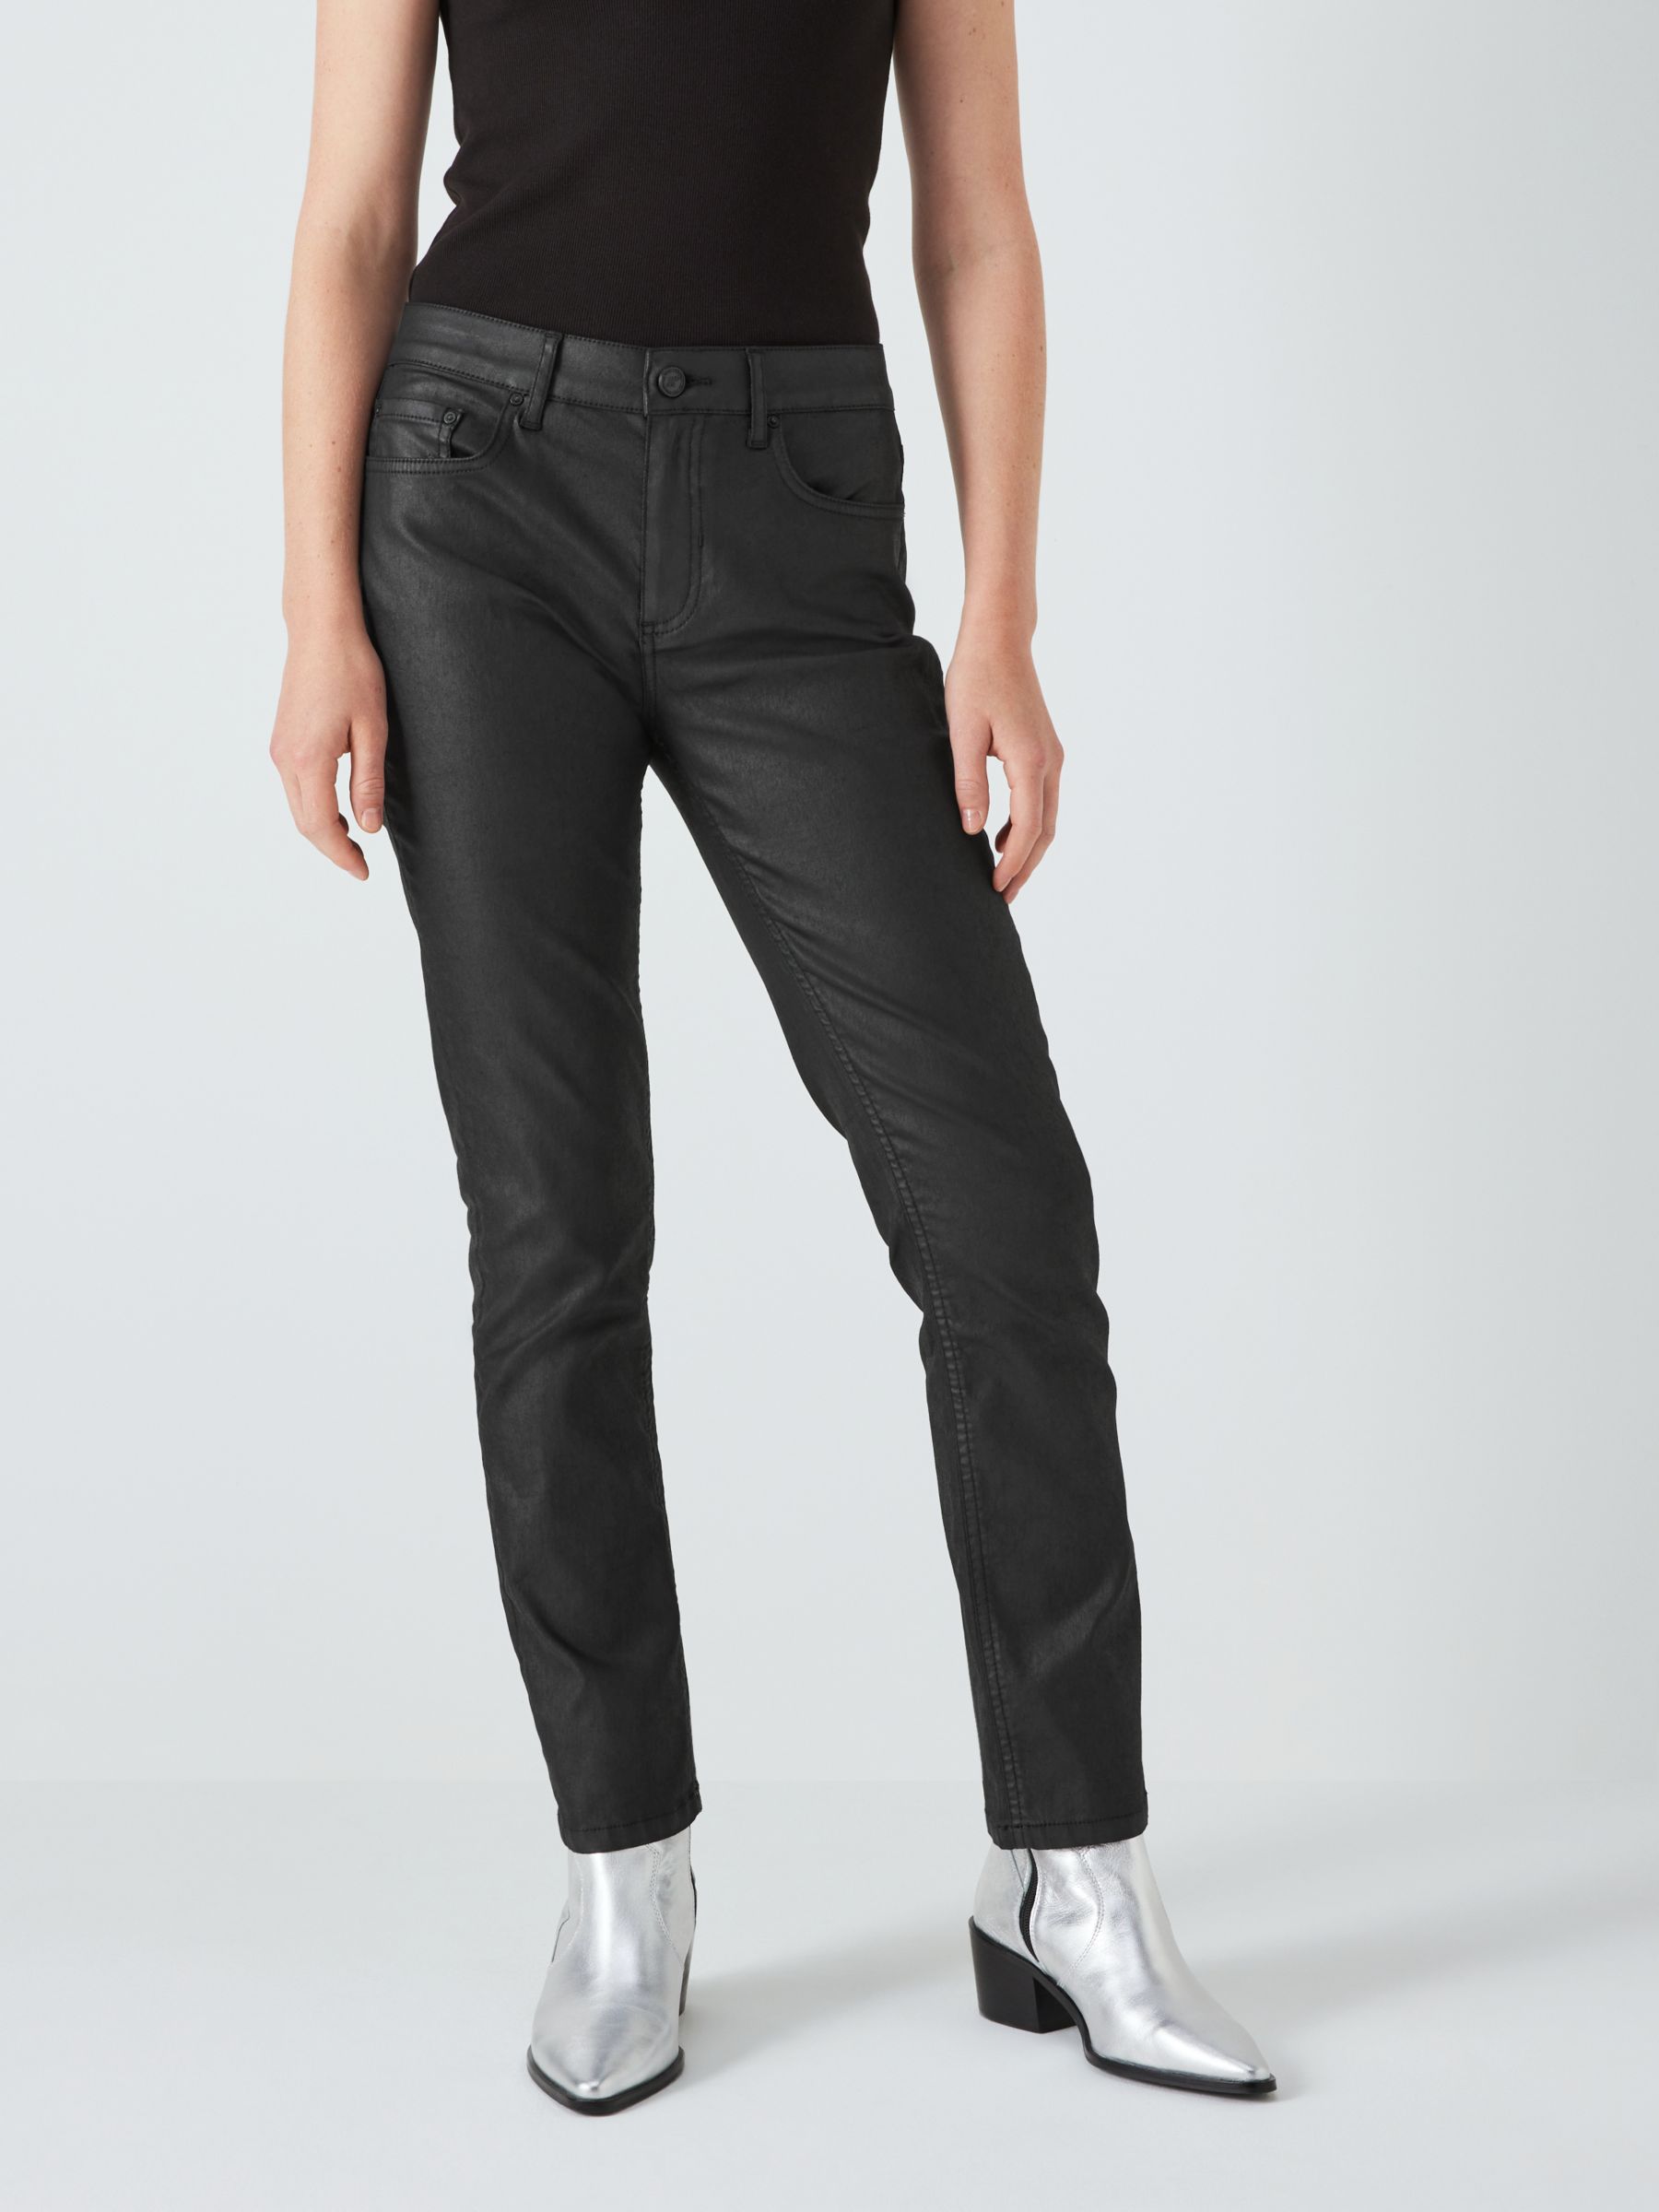 AND/OR Silverlake Plain Coated Jeans, Black, 26R